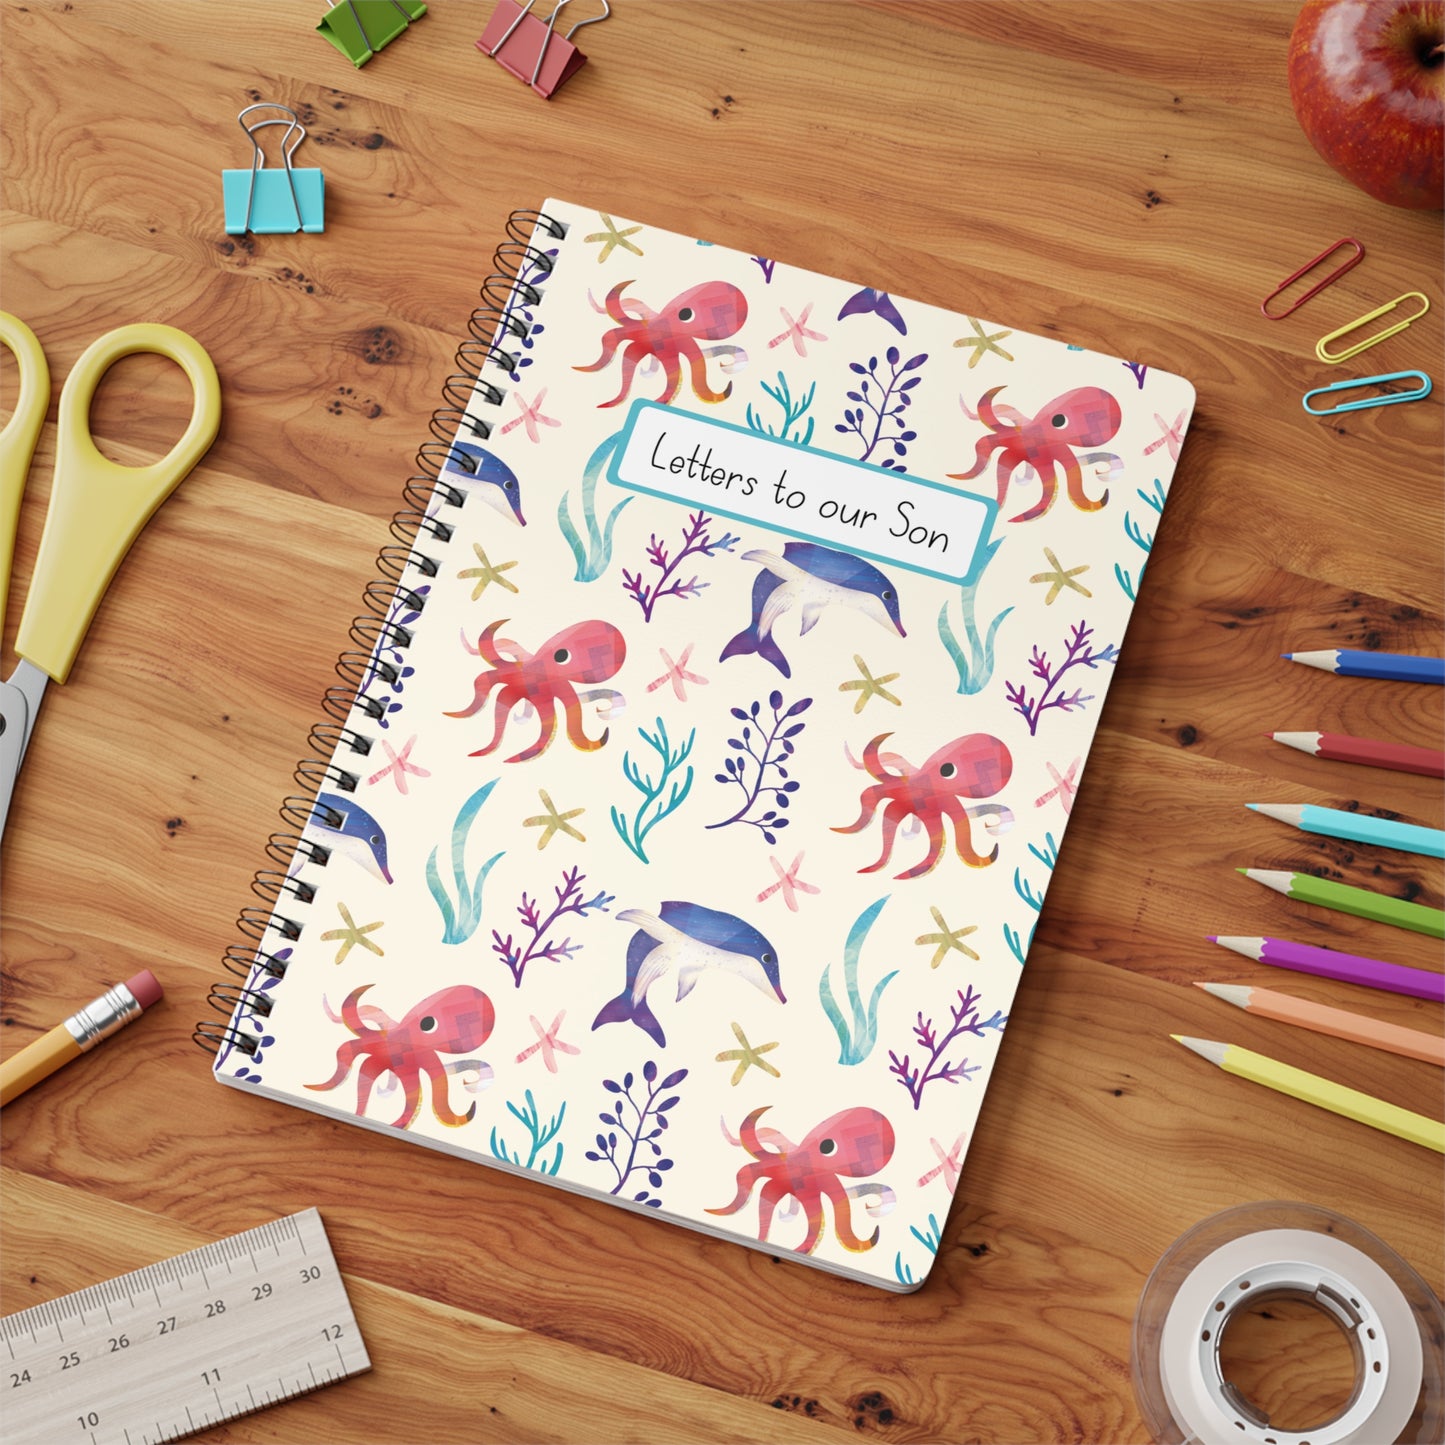 Spiral Bound Letters to my Son Notebook - Ocean Creatures